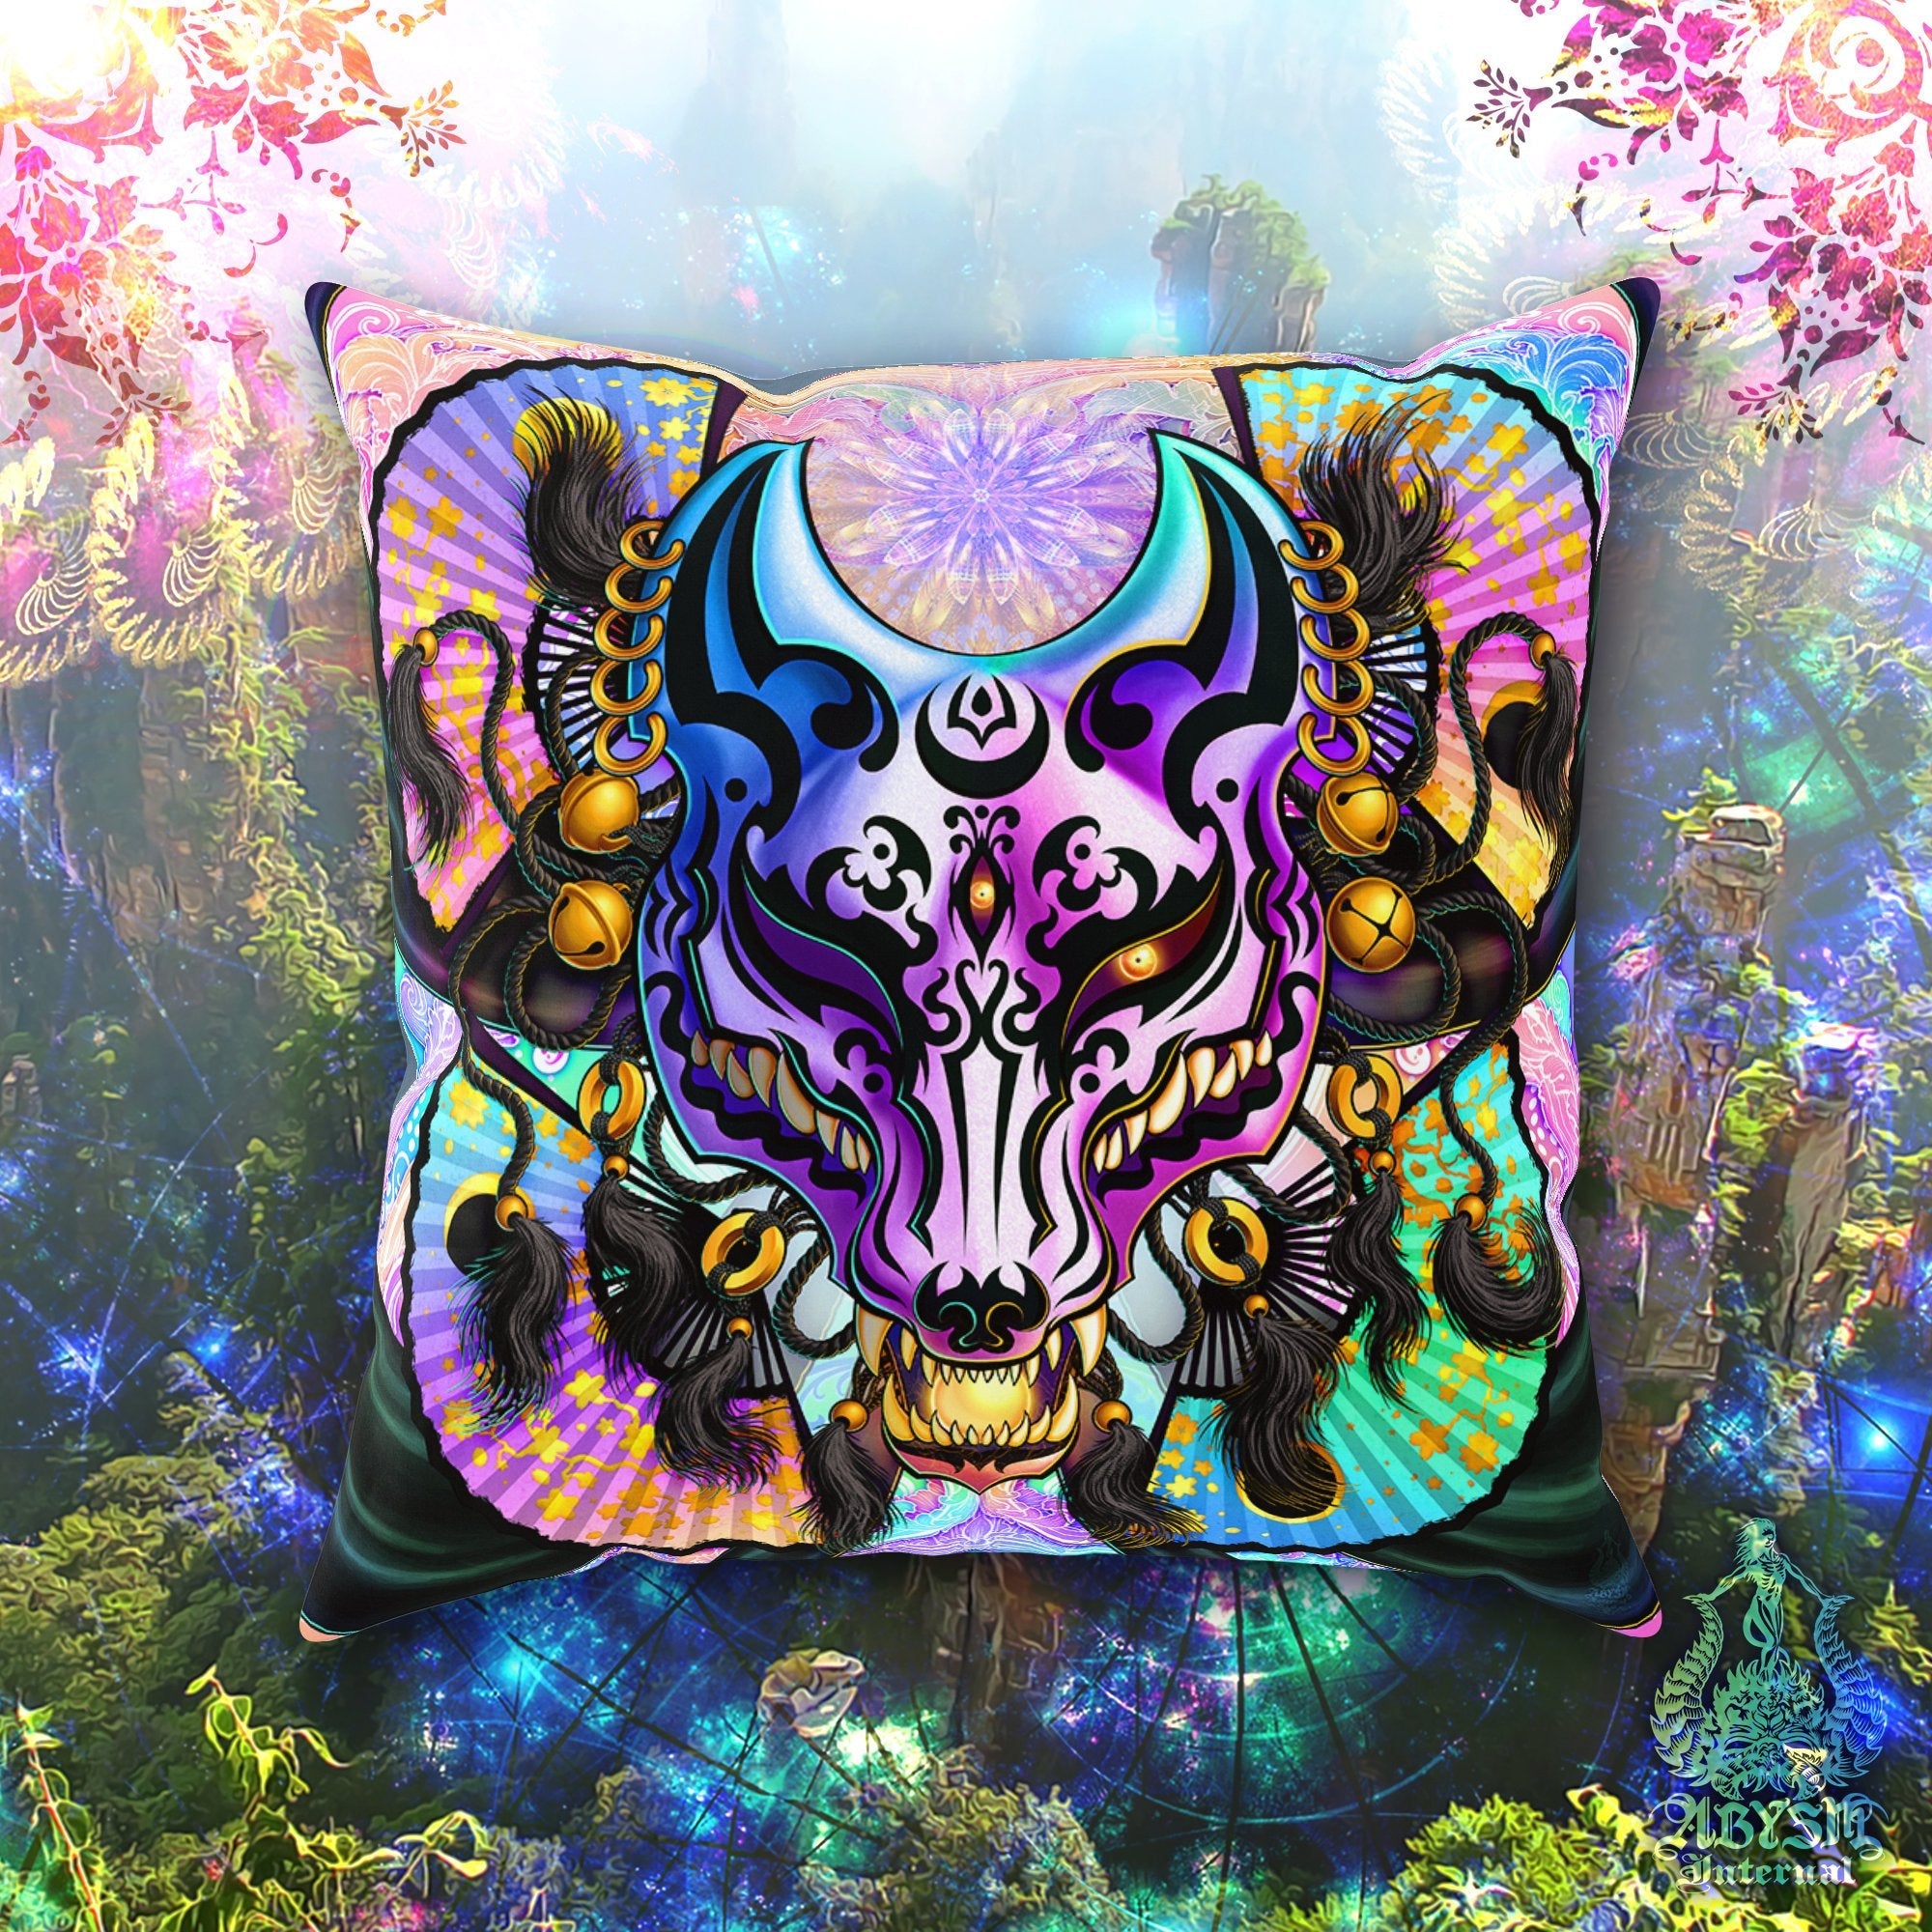 Kitsune Throw Pillow, Decorative Accent Cushion, Japanese Fox Mask, Okami, Anime and Gamer Room Decor, Funky and Eclectic Home - Holographic Pastel Punk Black - Abysm Internal